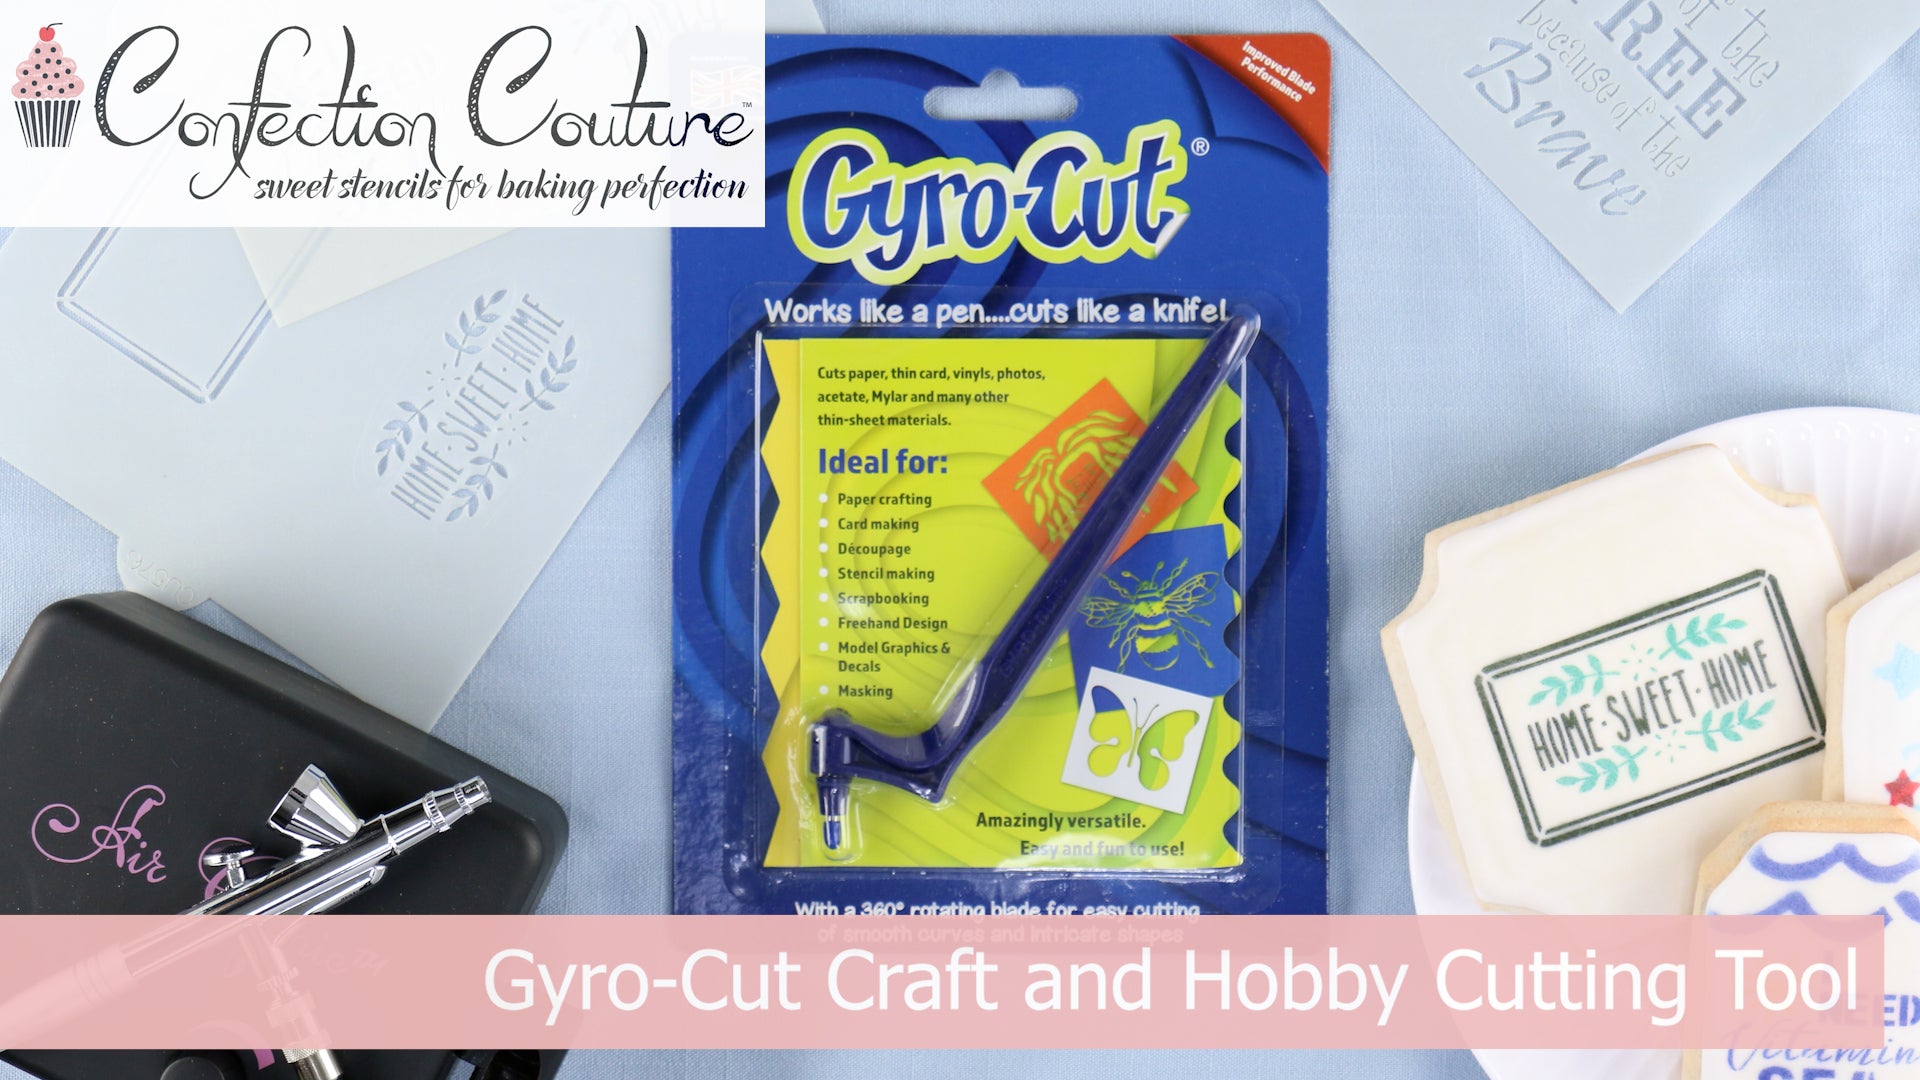 Thoughts on the gyro cutter? #crafts #craftsupplies #craftcontraptionc